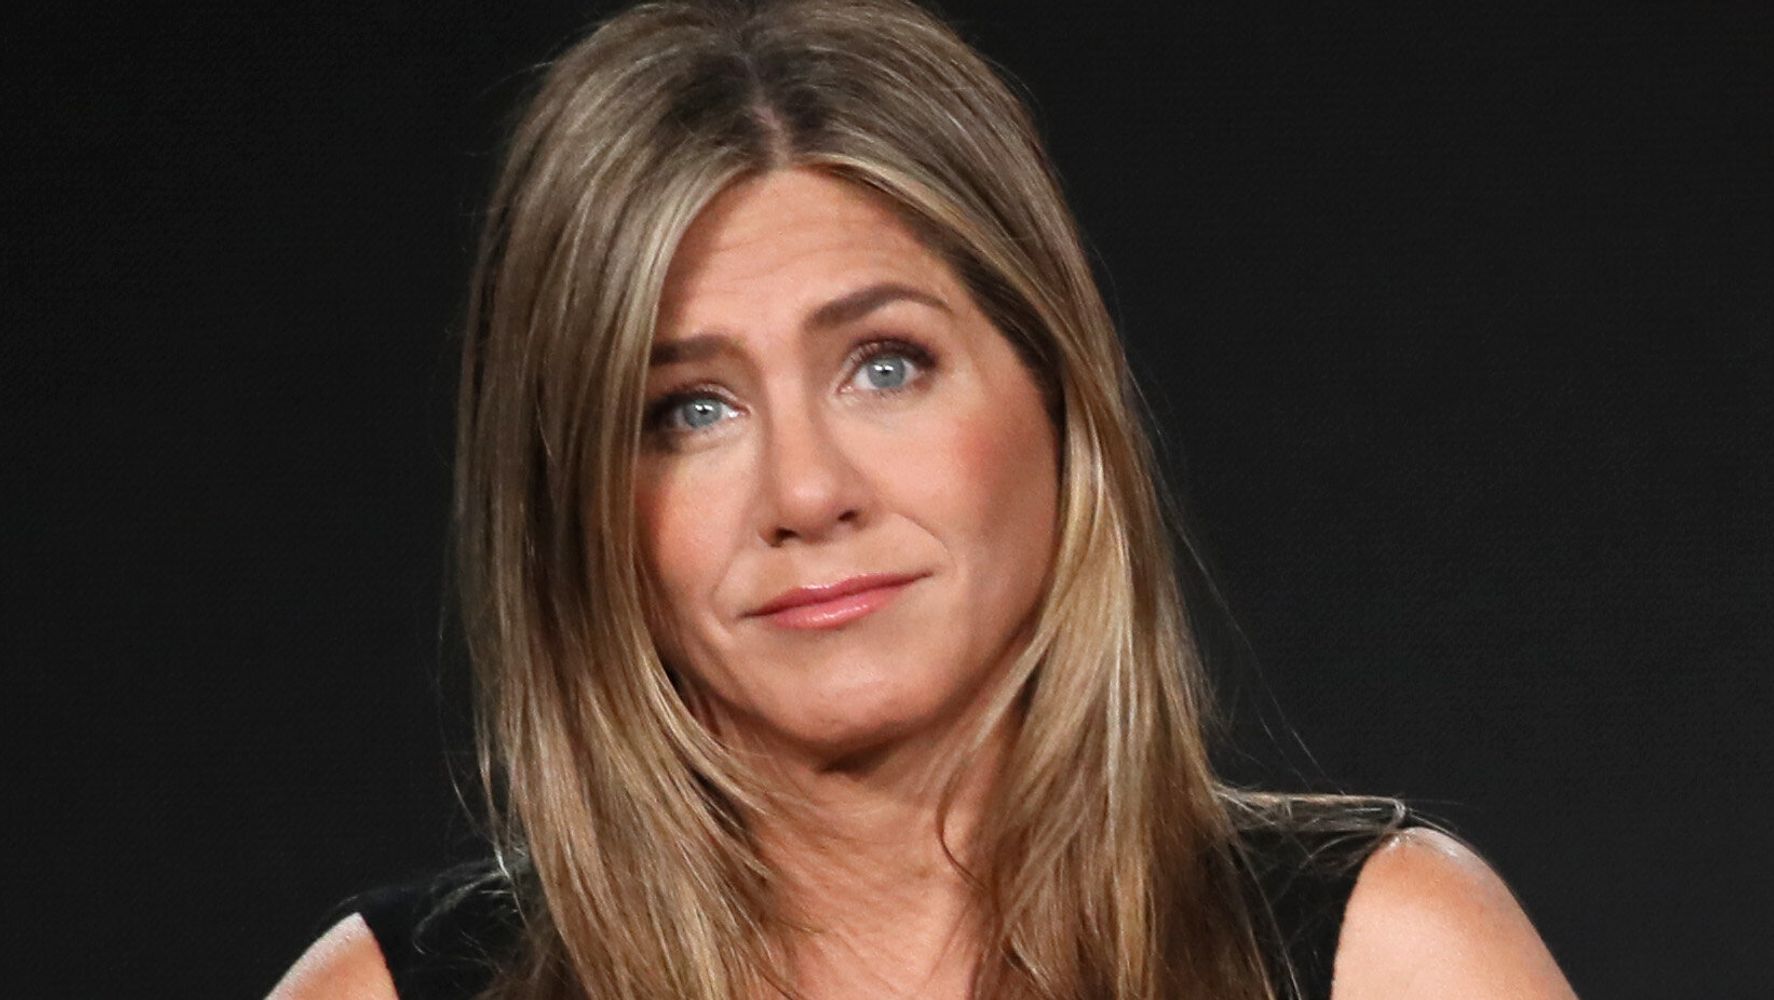 Jennifer Aniston Is Done Taking 'Really Hurtful' Pregnancy Rumors Personally | HuffPost Entertainment